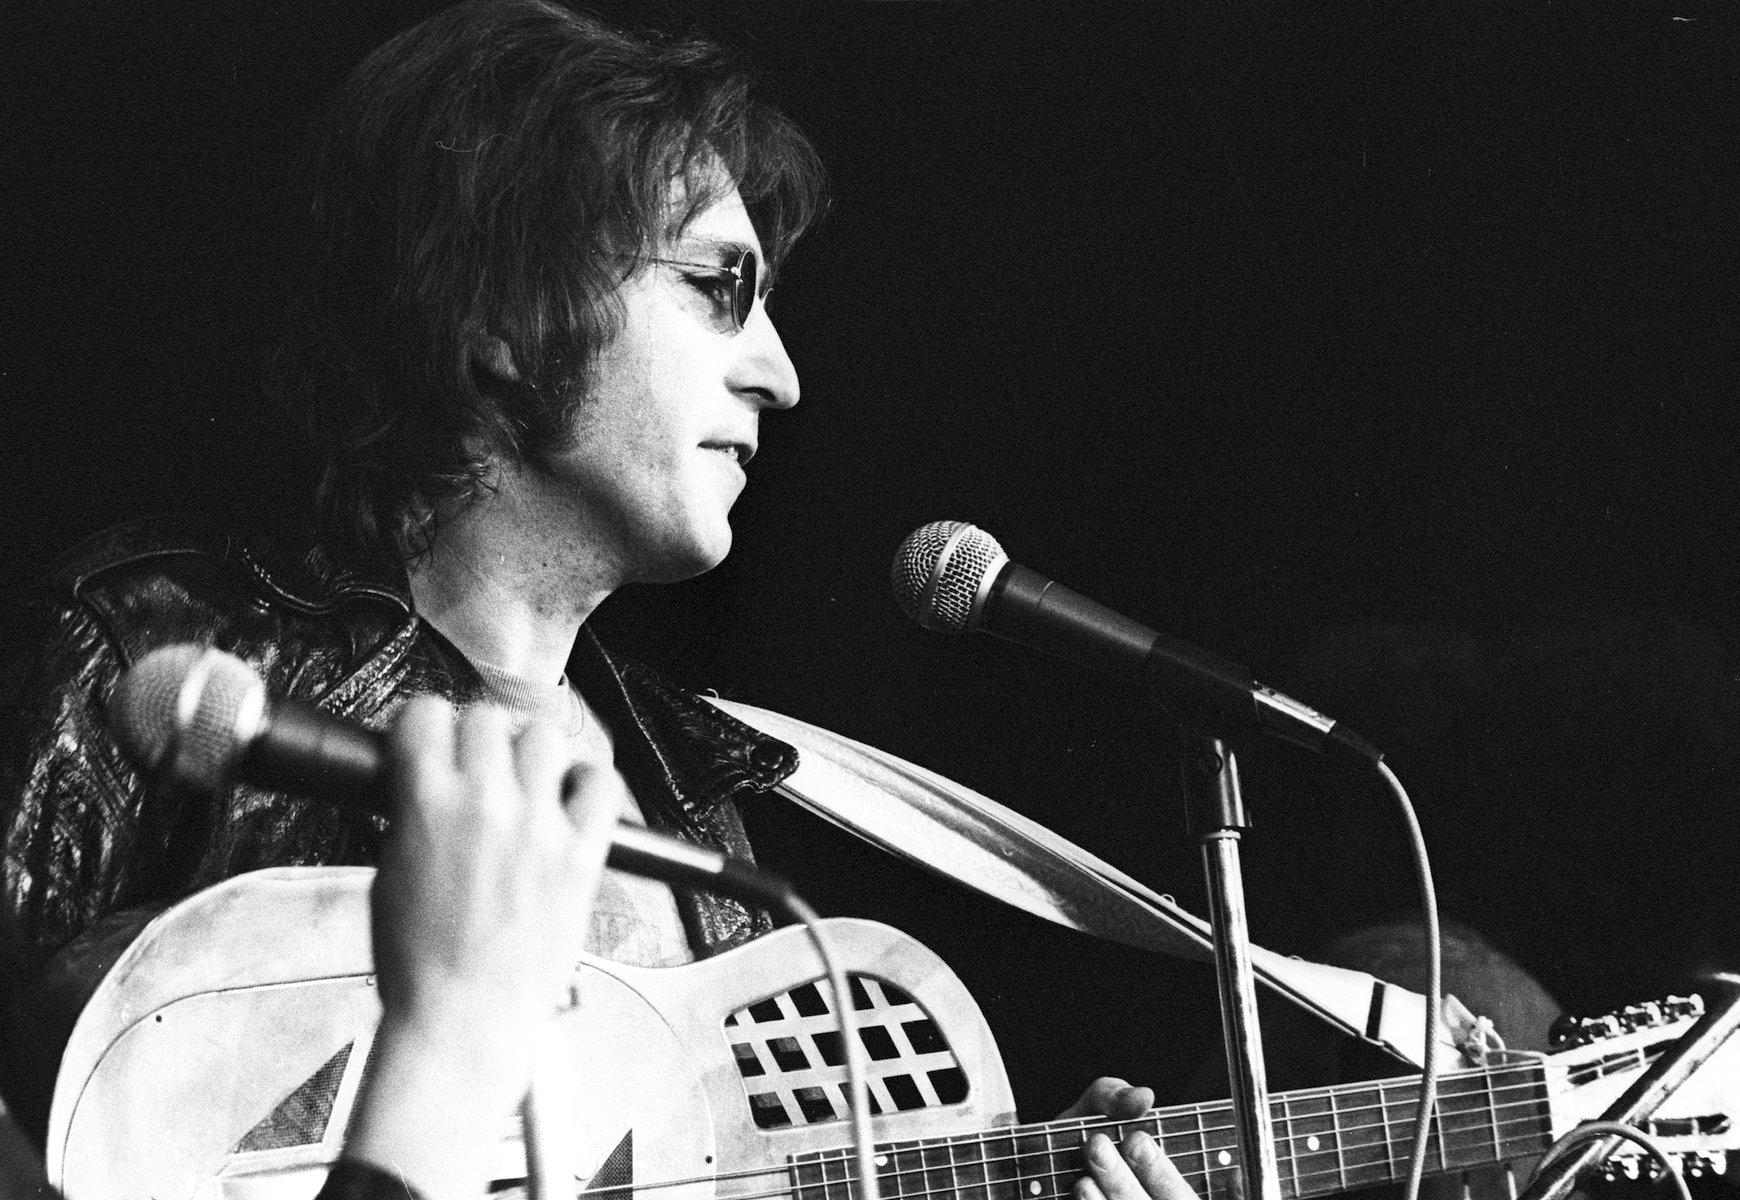 John Lennon formerly of The Beatles performs at the Chrysler Arena in Michigan